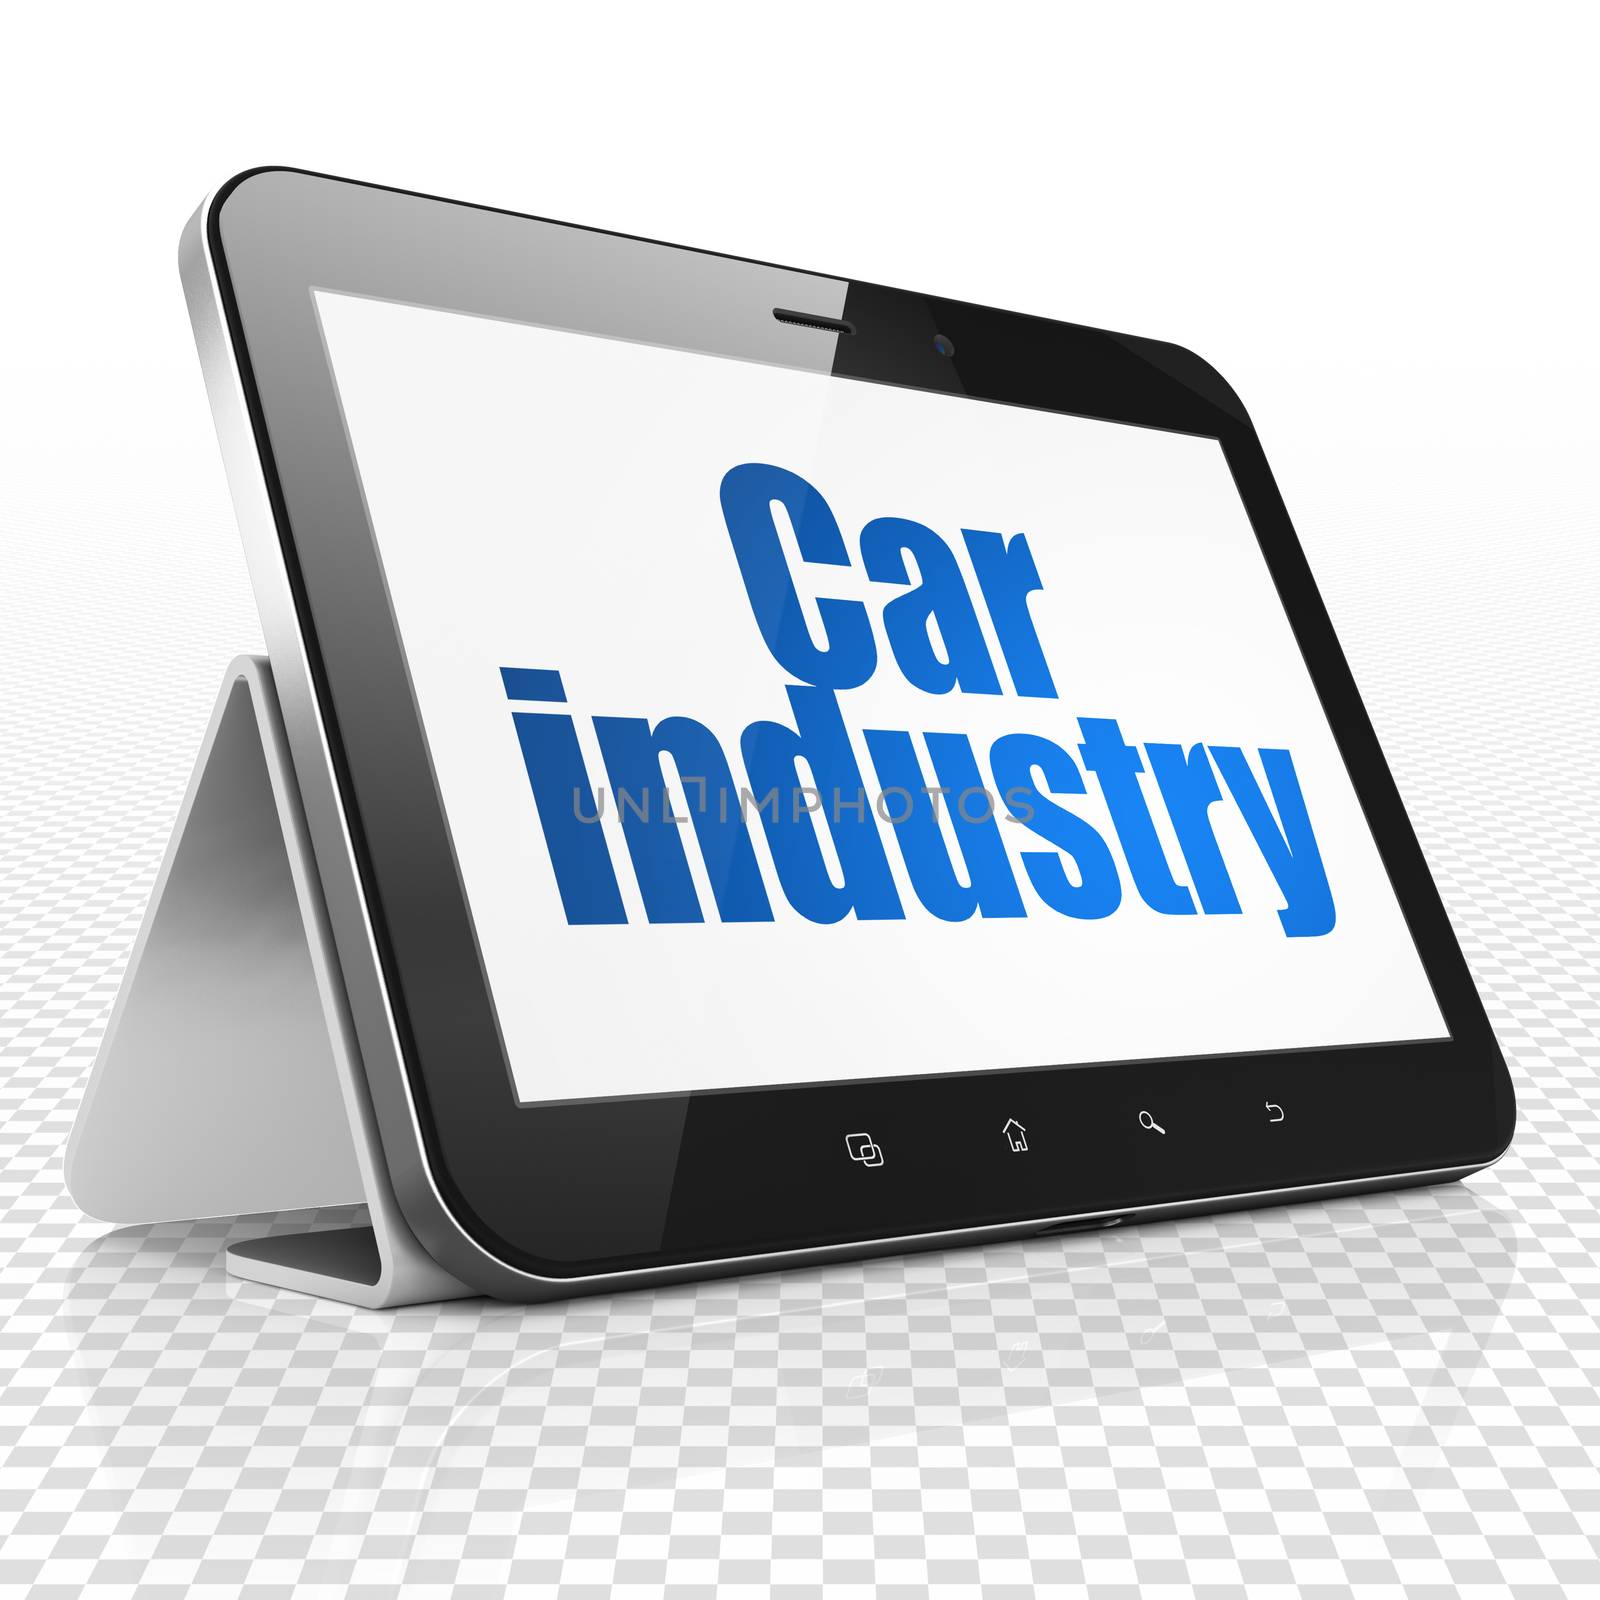 Industry concept: Tablet Computer with blue text Car Industry on display, 3D rendering